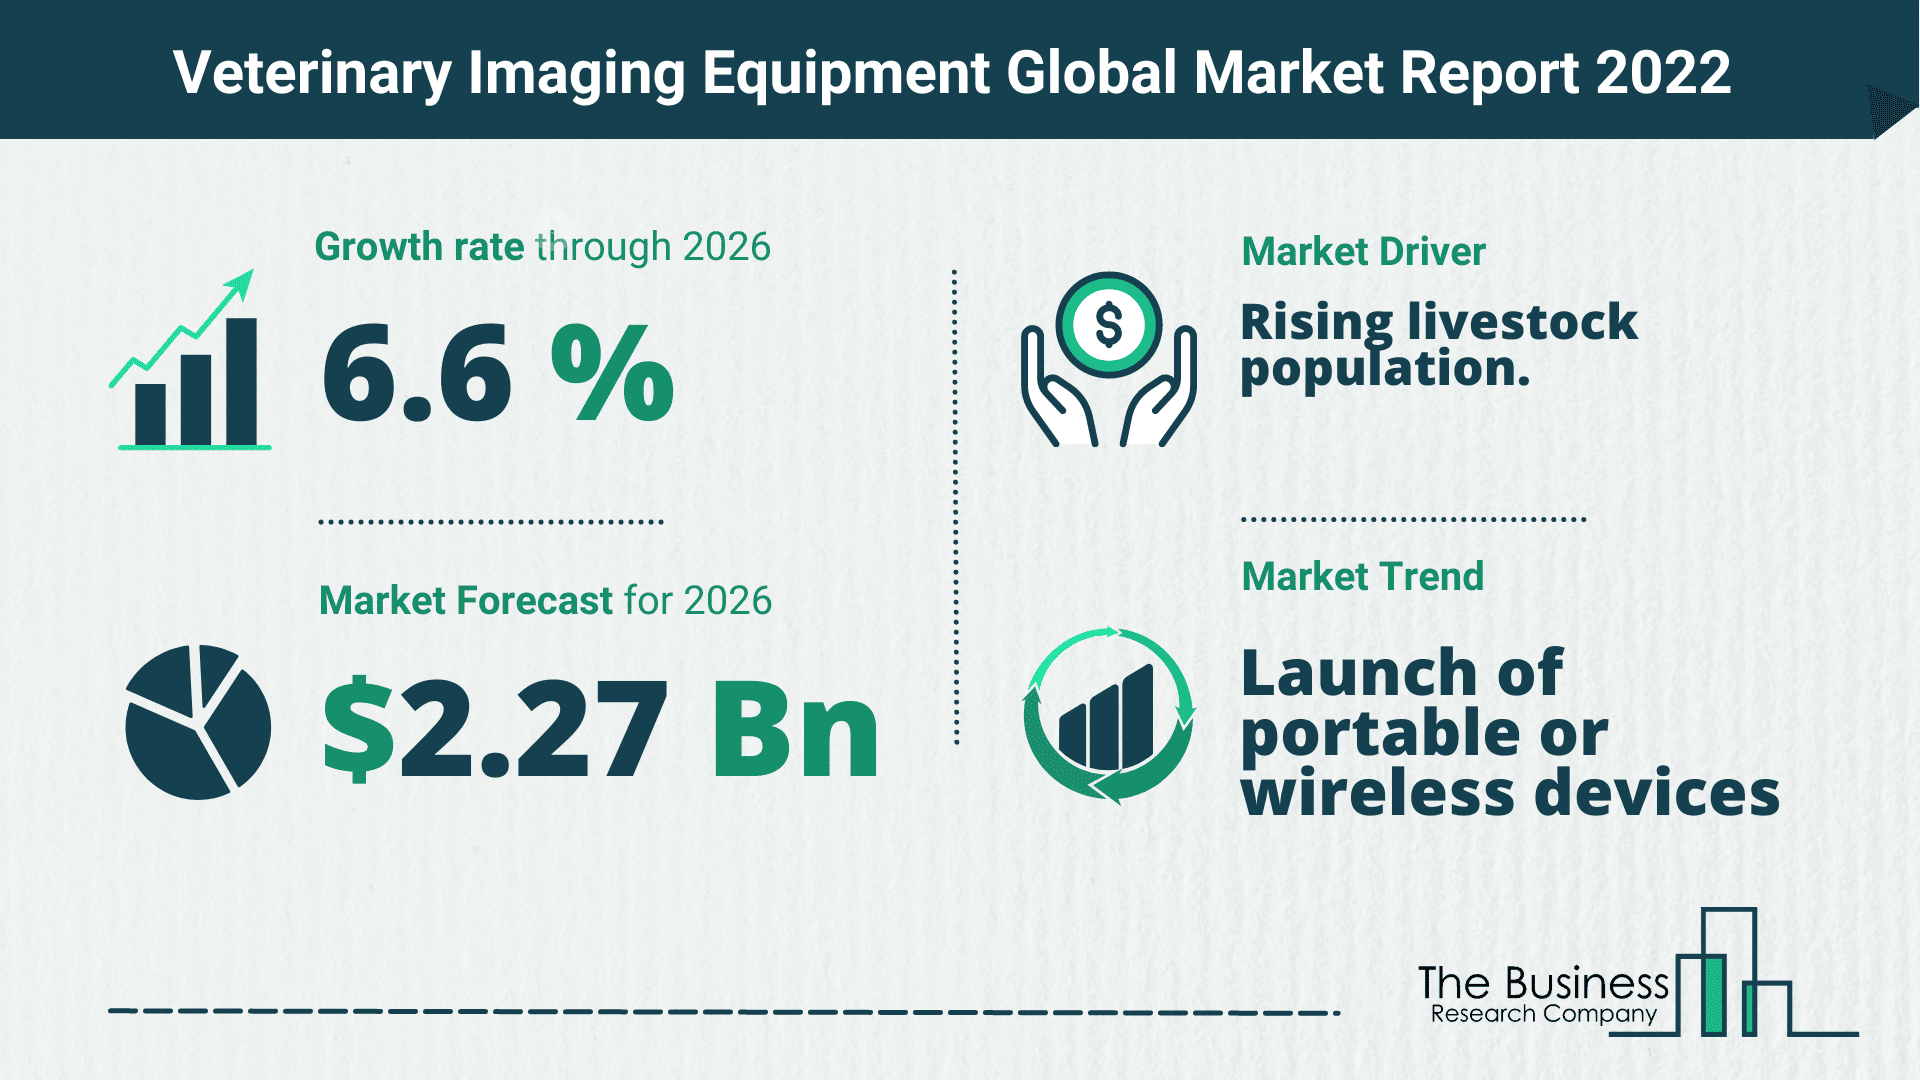 Latest Veterinary Imaging Equipment Market Growth Study 2022-2026 By The Business Research Company